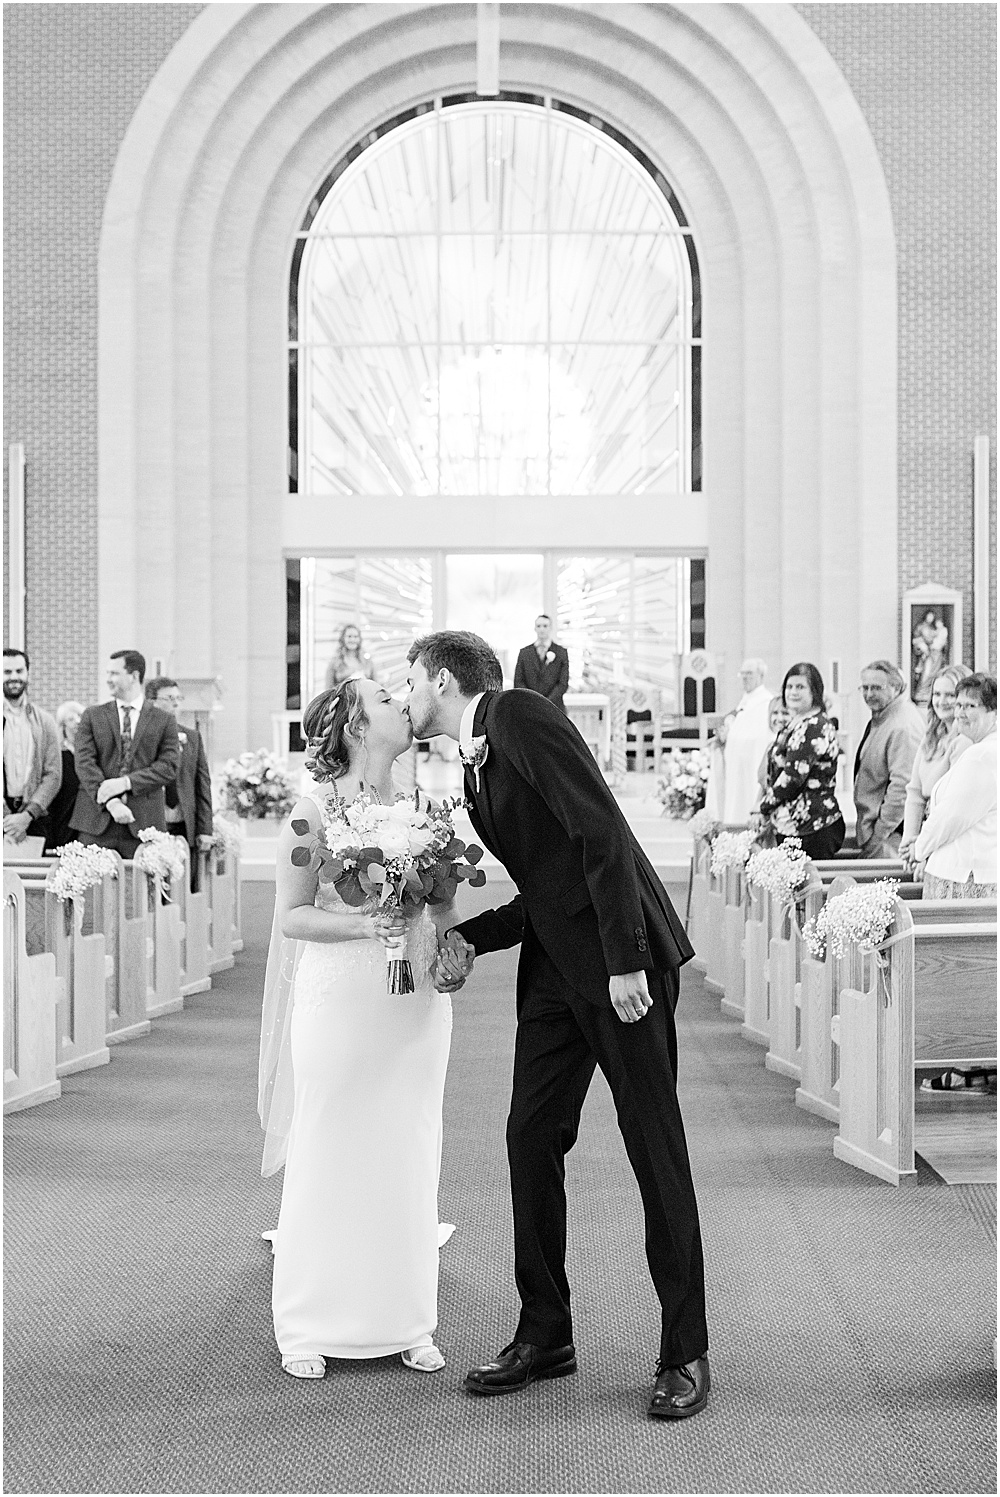 Bride and groom share kiss in aisle after St. Maria Goretti Catholic Church wedding ceremony in Westfield, Indiana